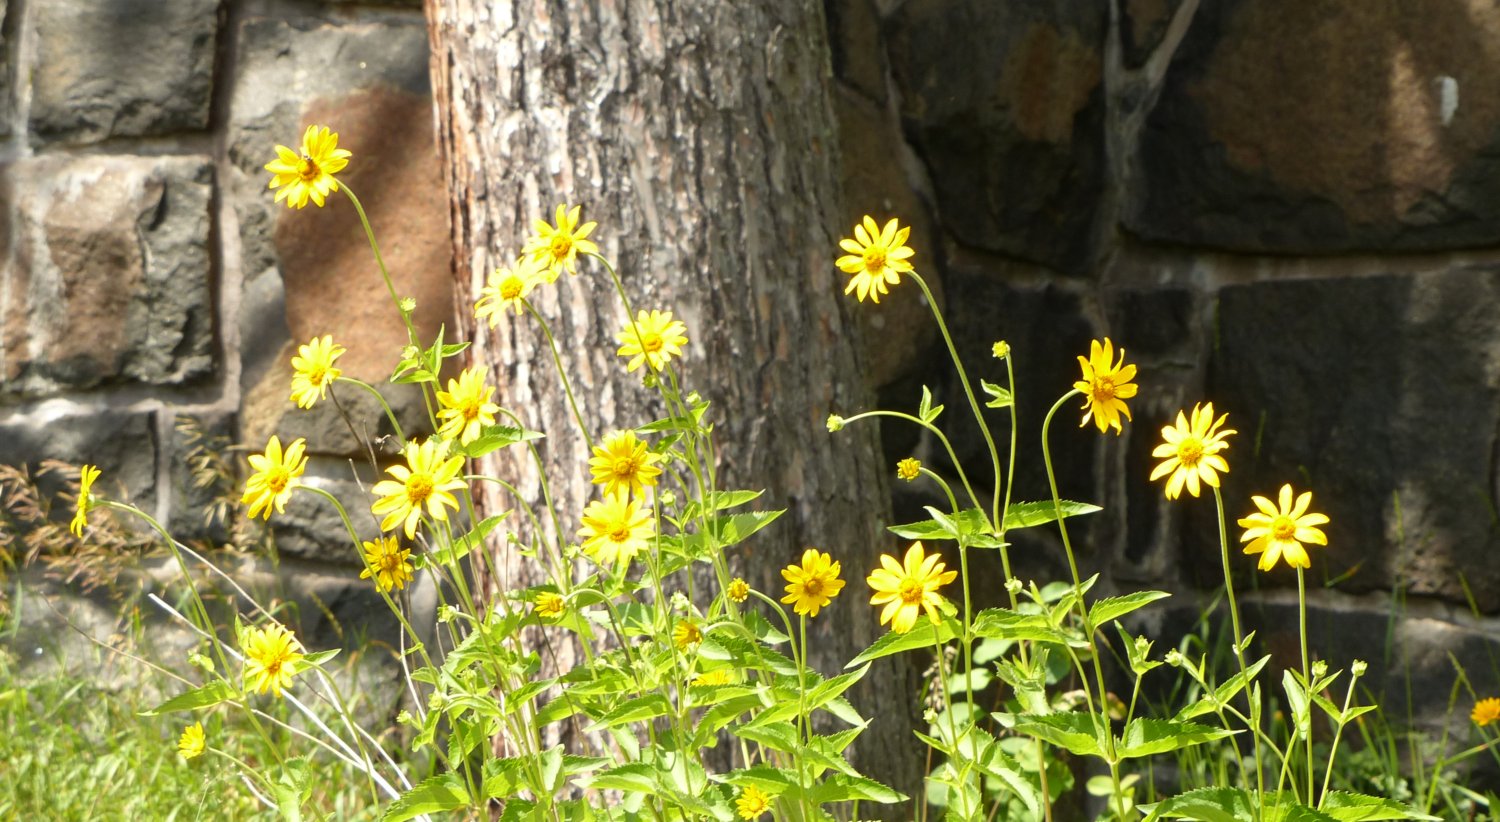 Photograph of a stone wall that goes behind a tree trung and flowers.